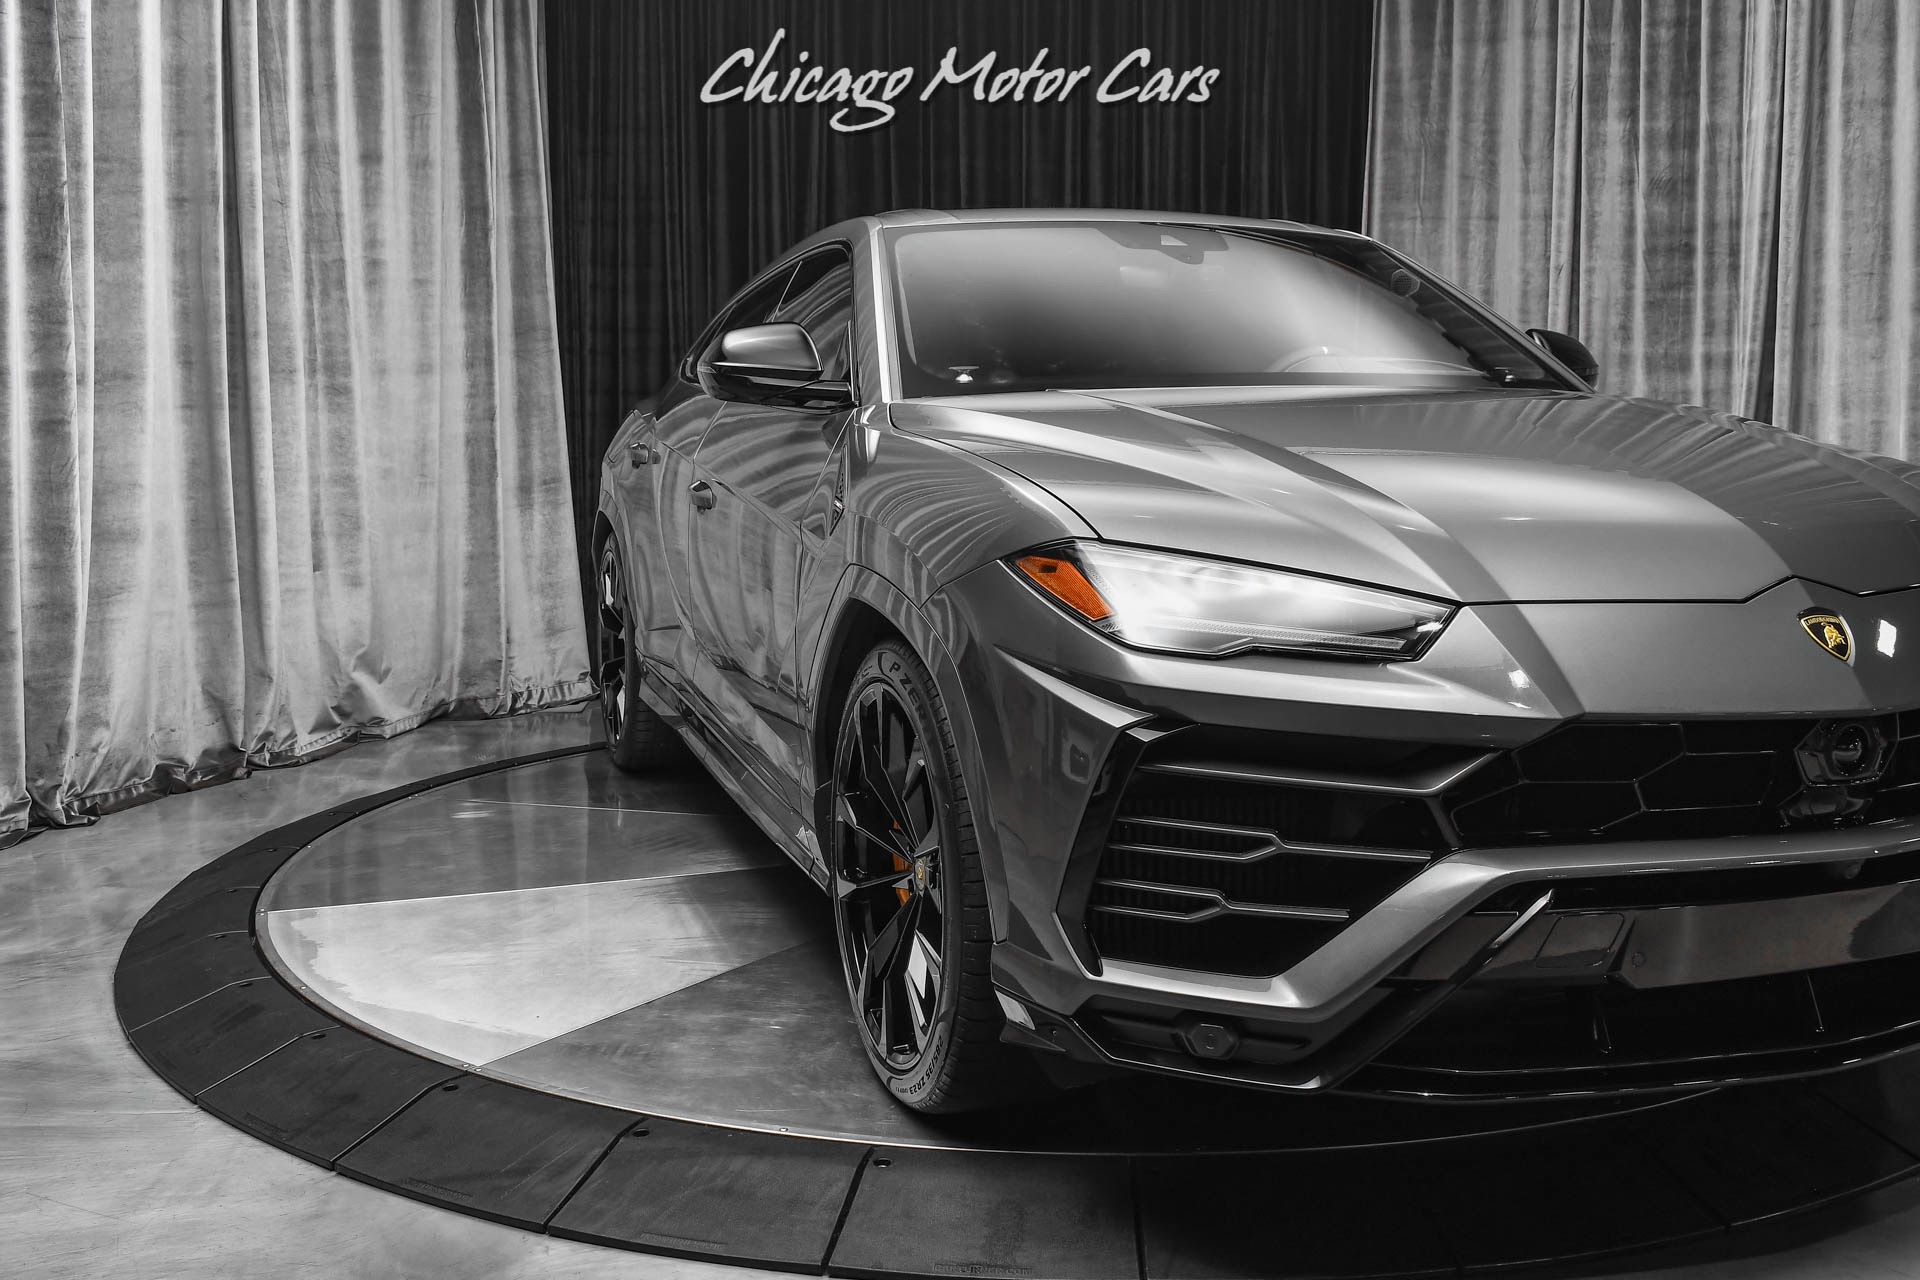 Used 2021 Lamborghini Urus Taigete 23s Hard Loaded! B&O Advanced 3D Audio  System! For Sale (Special Pricing) | Chicago Motor Cars Stock #18601